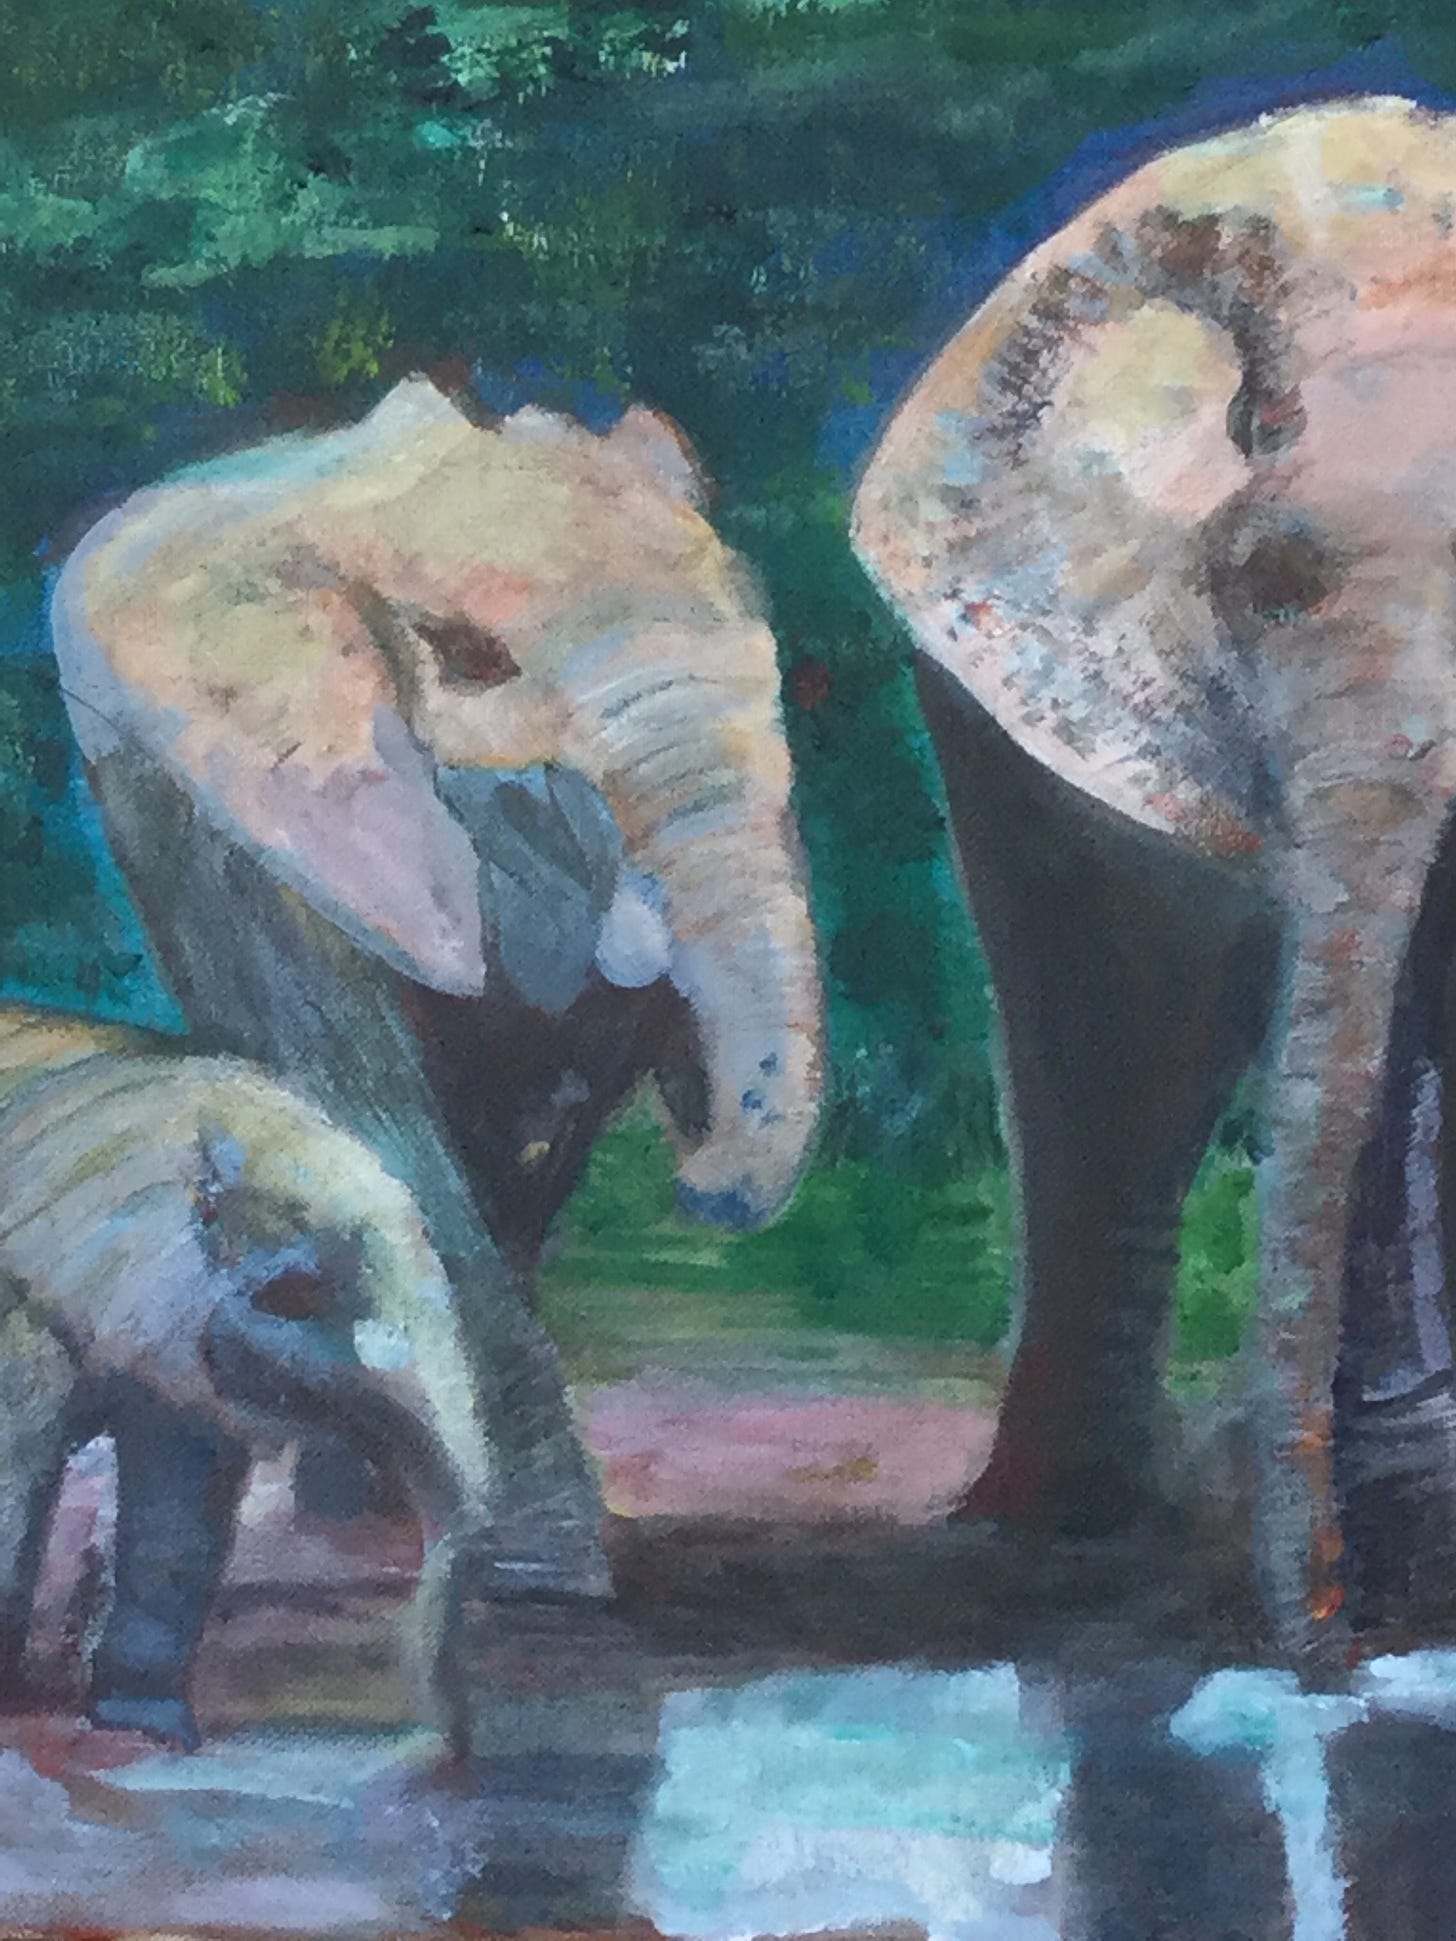 Acrylic painting by Sherry Killam Arts showing detail of texture, shadows, and positioning of elephant family.